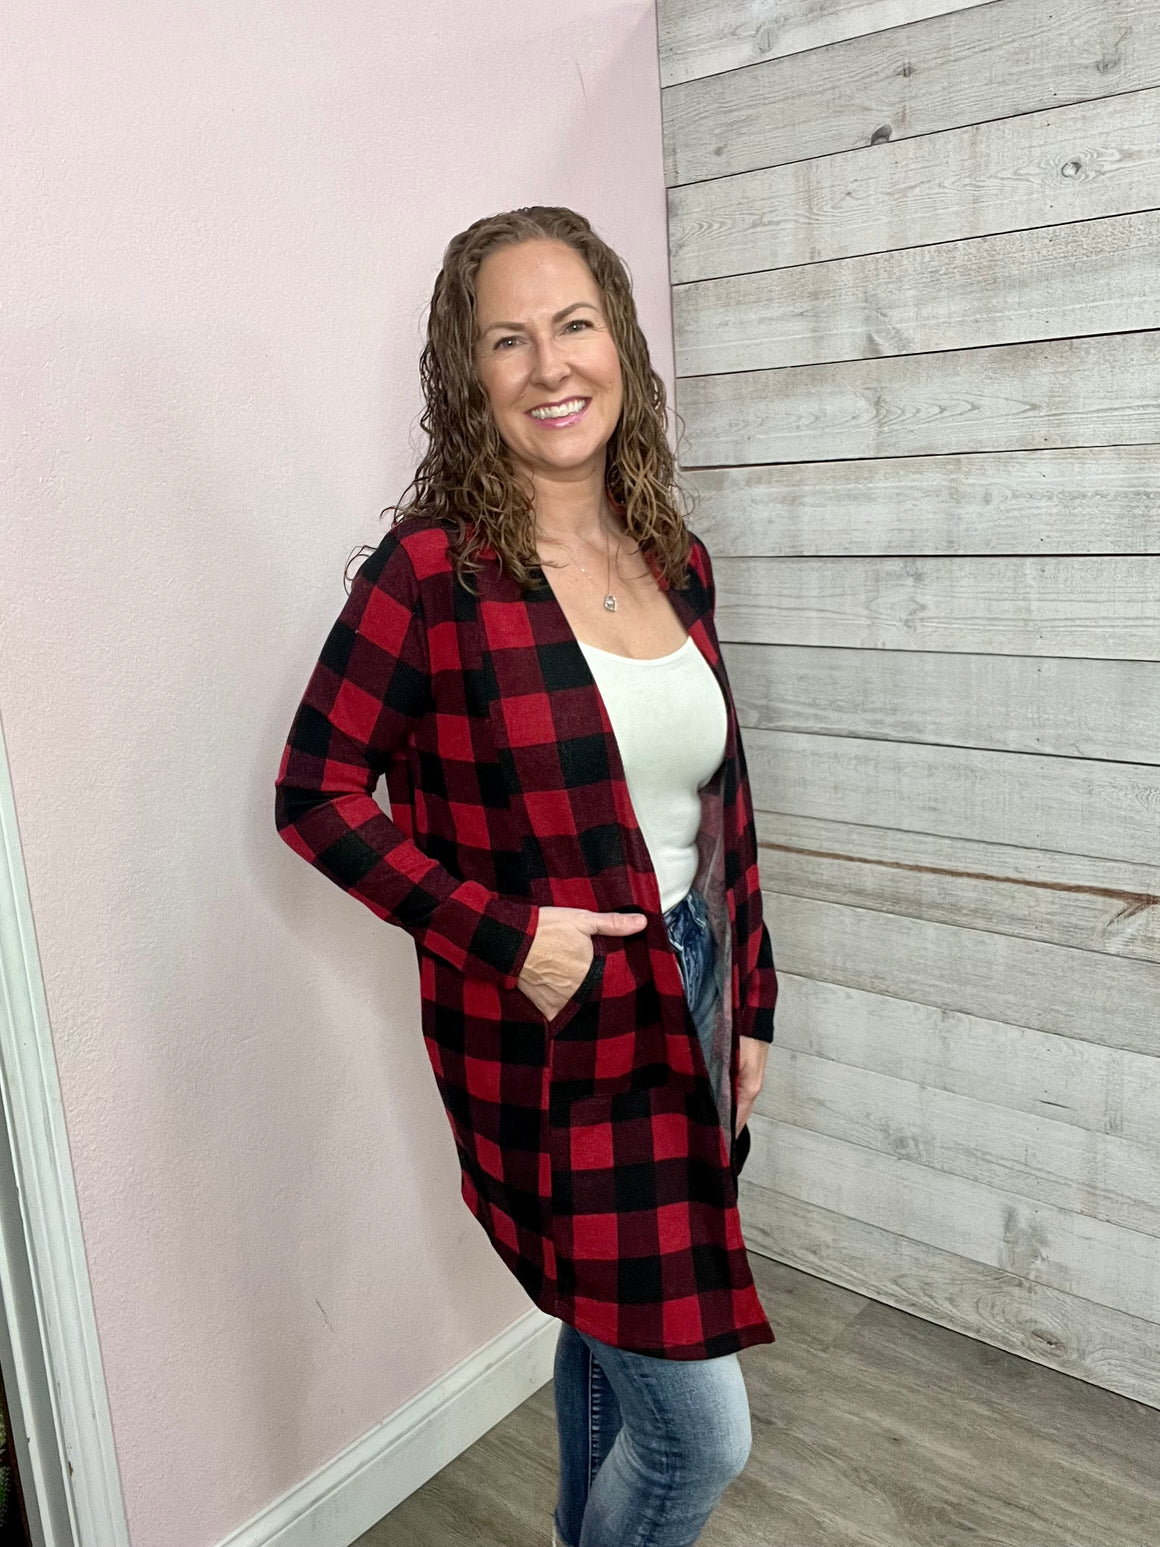 BF "Discover More" Buffalo Plaid Cardigan- Red